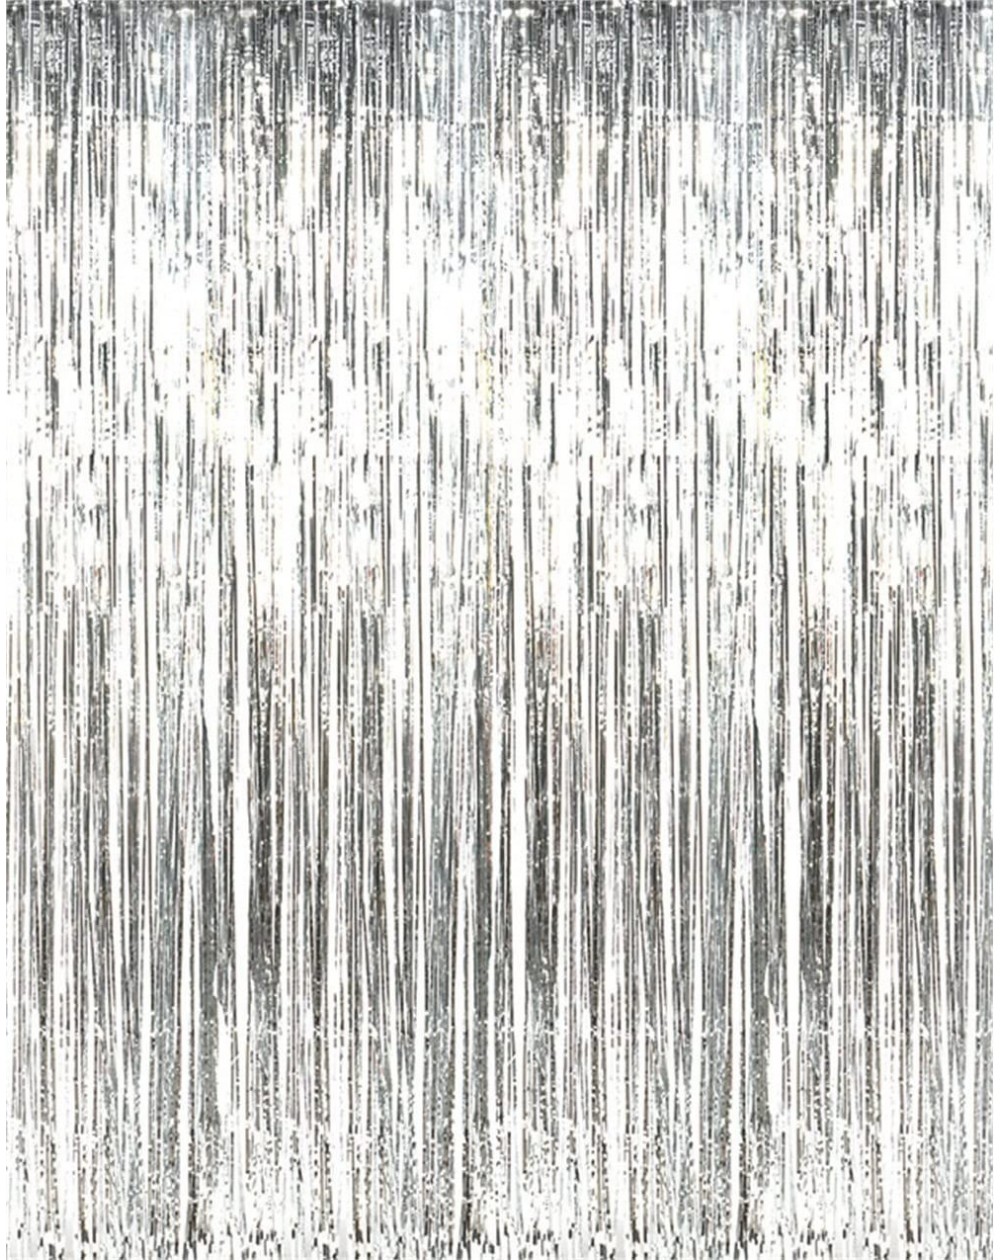 Photobooth Props 3.2 ft x 9.8 ft Metallic Tinsel Foil Fringe Curtains for Party Photo Backdrop Wedding Decor (Silver-1 Pack) ...